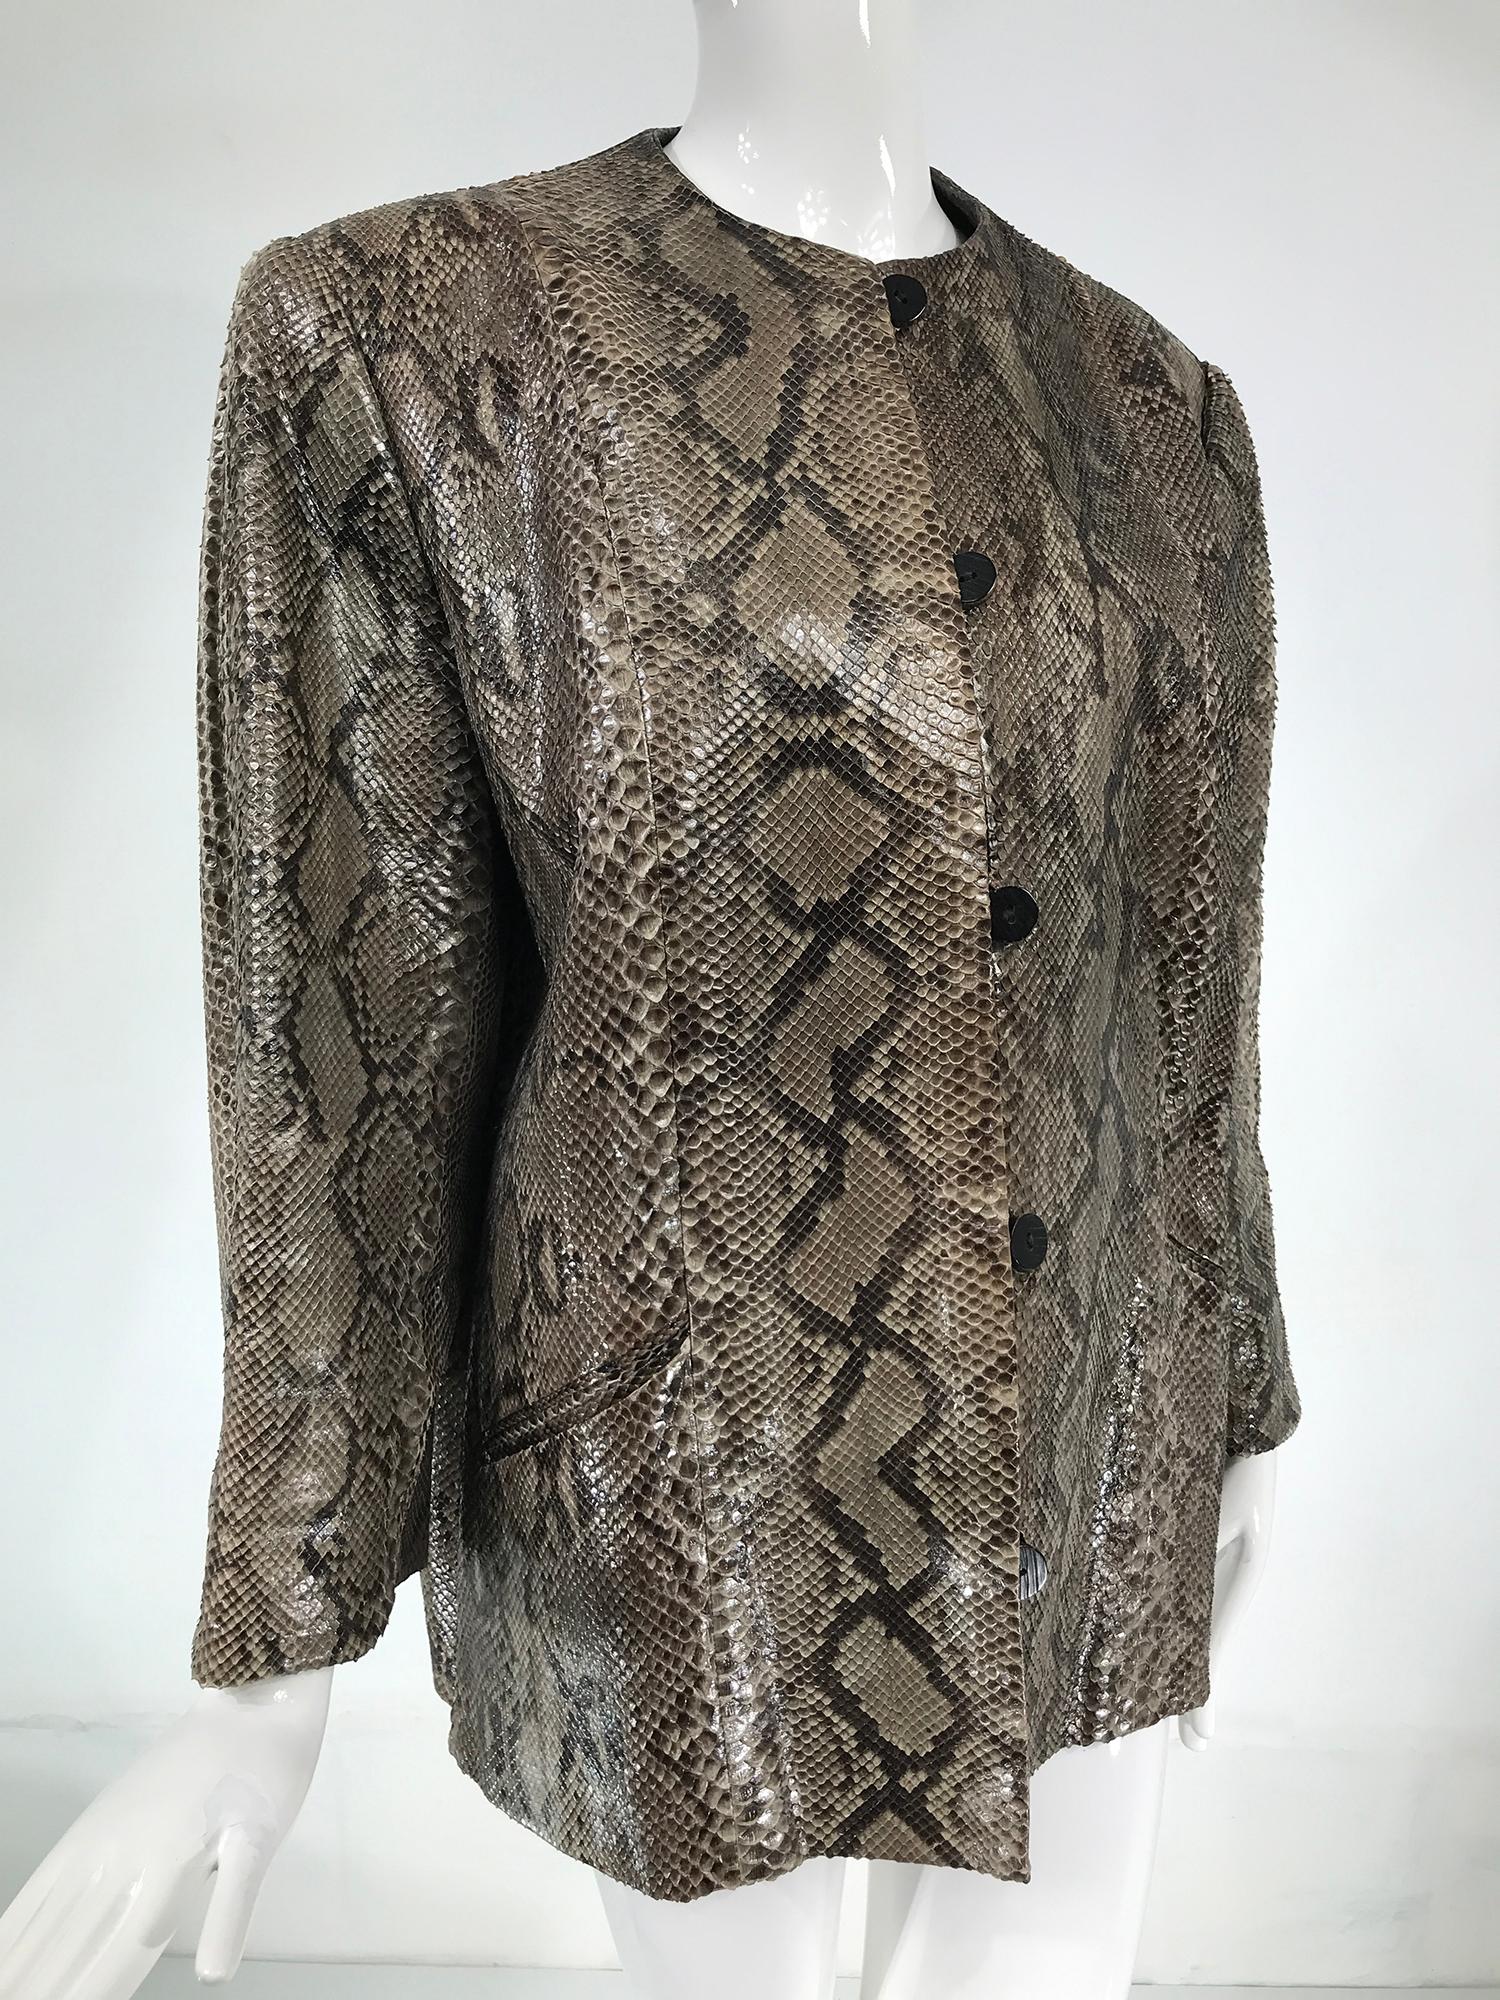 Vintage Bill Blass snakeskin button front jacket from the 1980s. Jewel neck jacket with wrist length sleeves, closes at the front with button & loops. There are angled hip front pockets. This jacket has a boxy shape. It is lined in black rayon. In